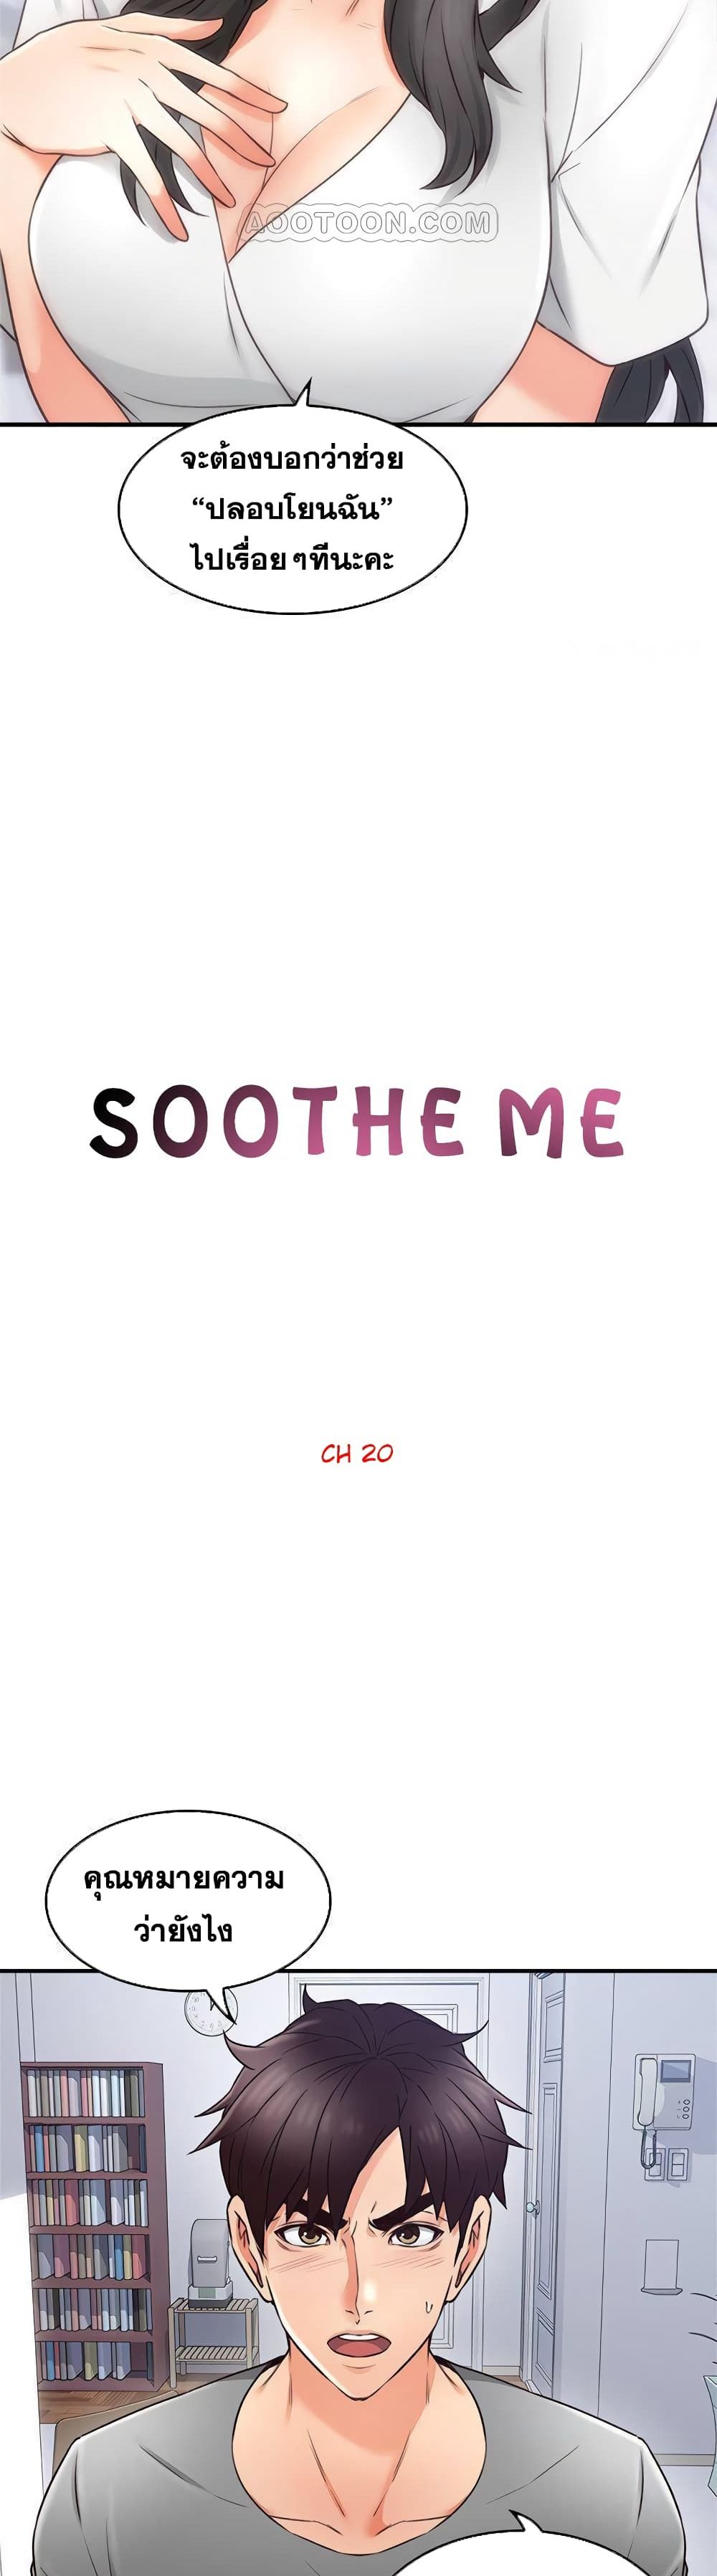 Soothe Me! 20 (5)